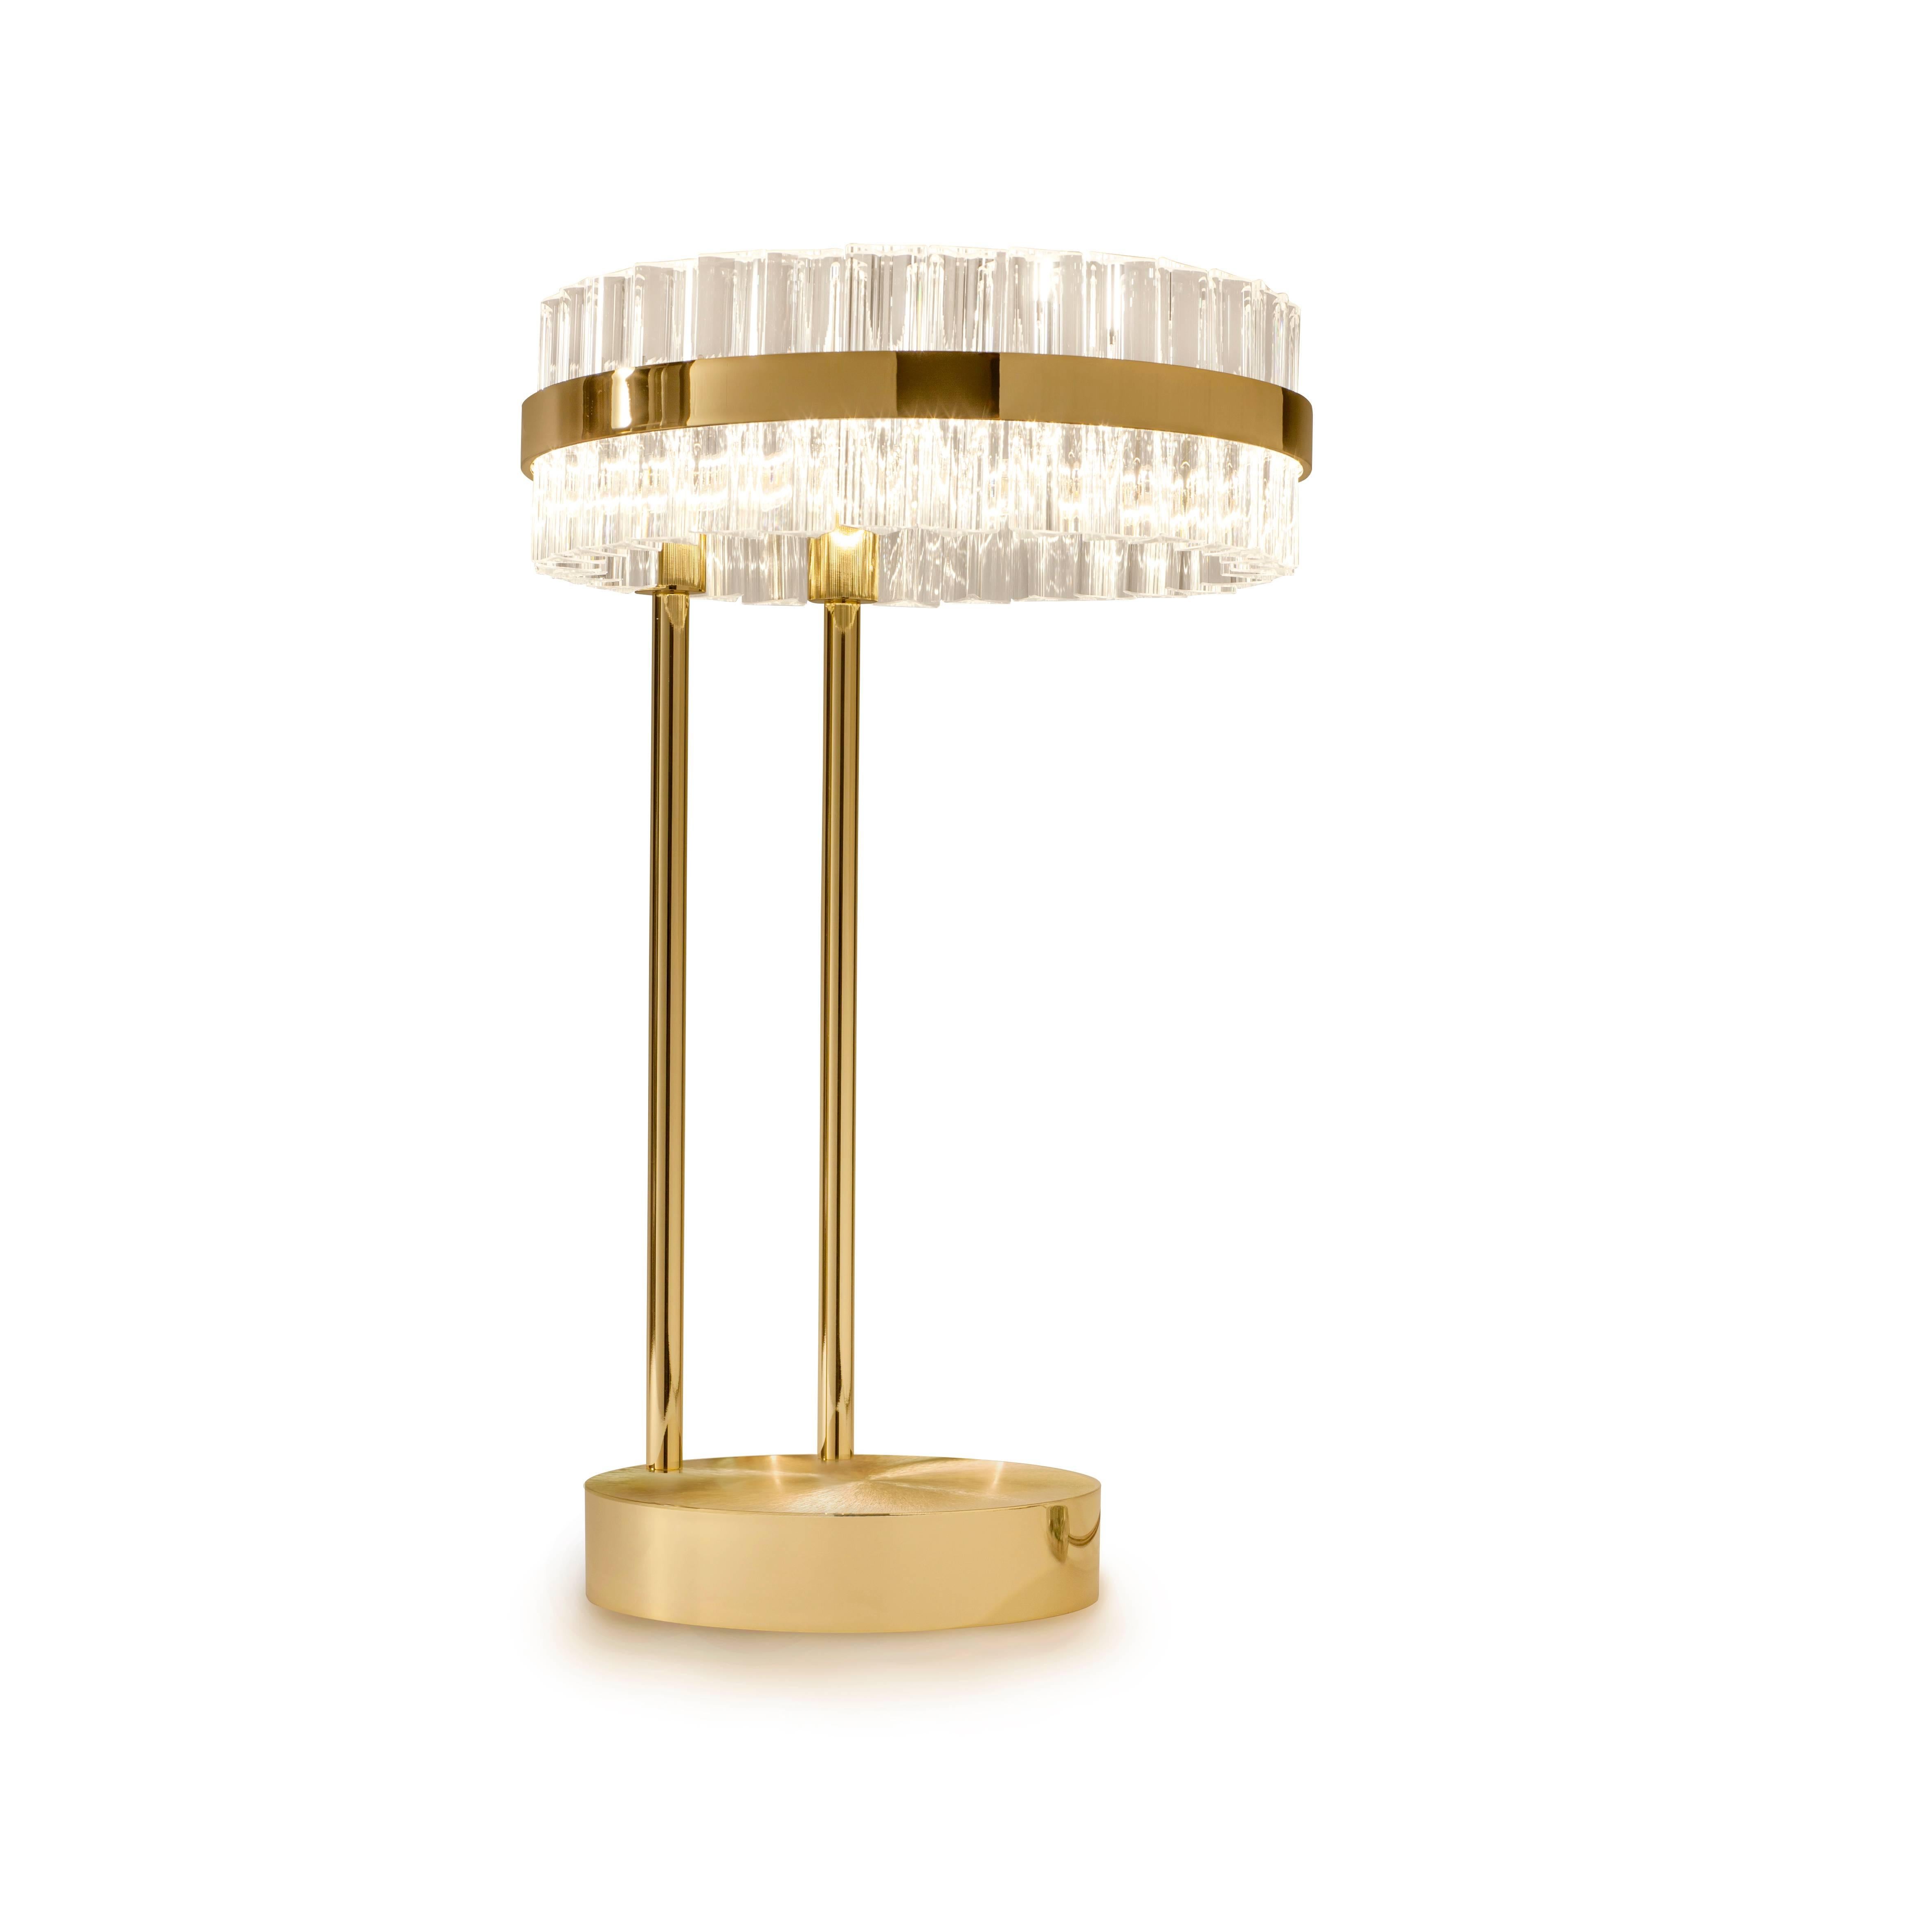 Saturno is inspired by the Constructivist’s use of geometric shapes. It draws on the simplicity and economy of using graphic lines and planes to organize or ‘construct’ the finished work.

The Saturno Table Lamp’s frame of polished gold encircles